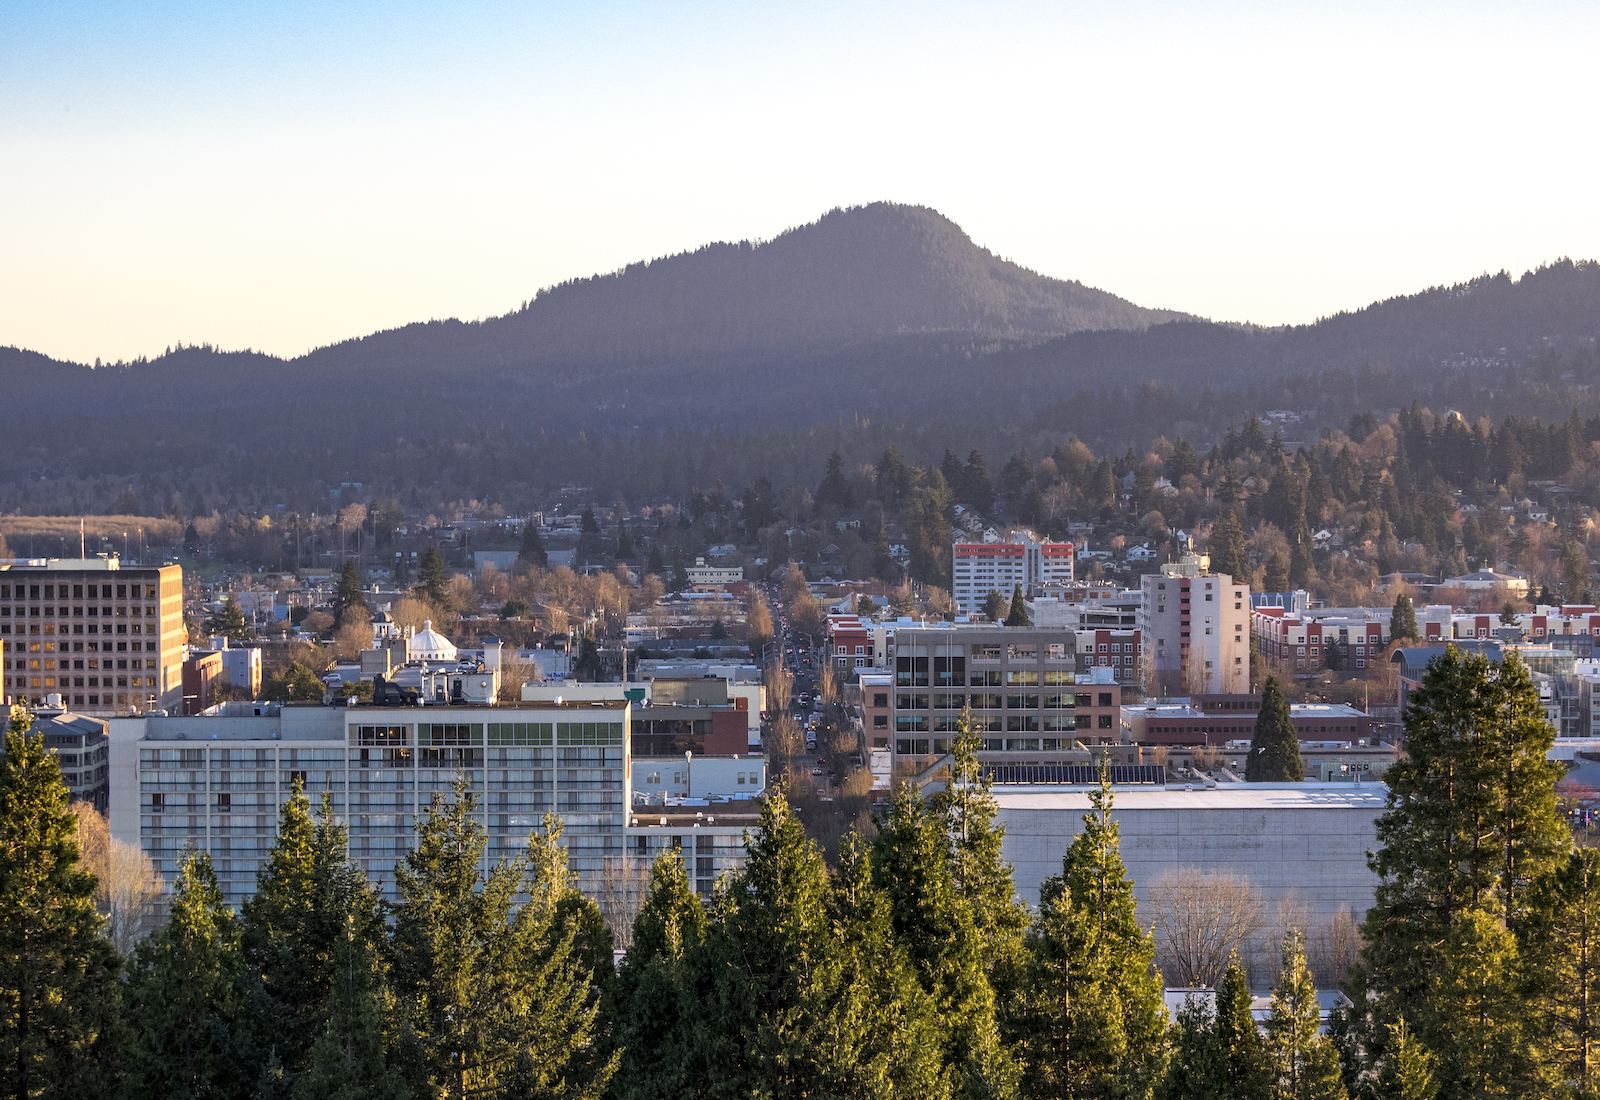 View of Eugene, OR, with a mountain in the background.